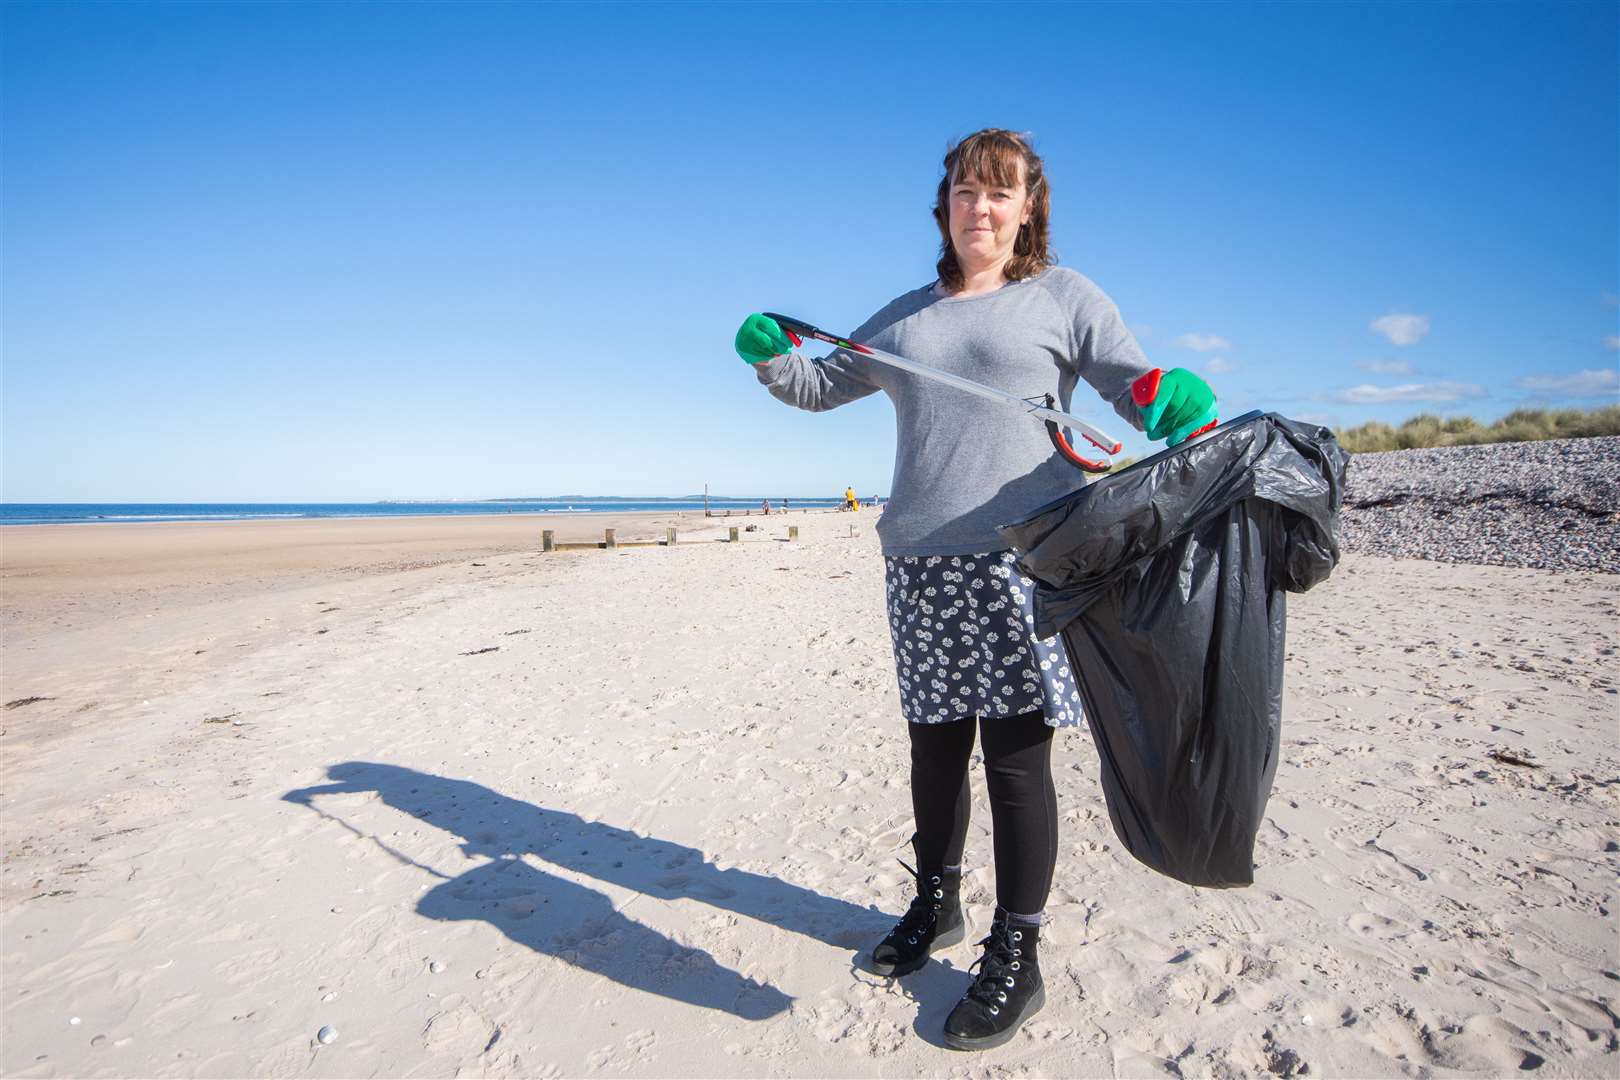 Sarah hopes more people will help comb the 100m stretch for rubbish.